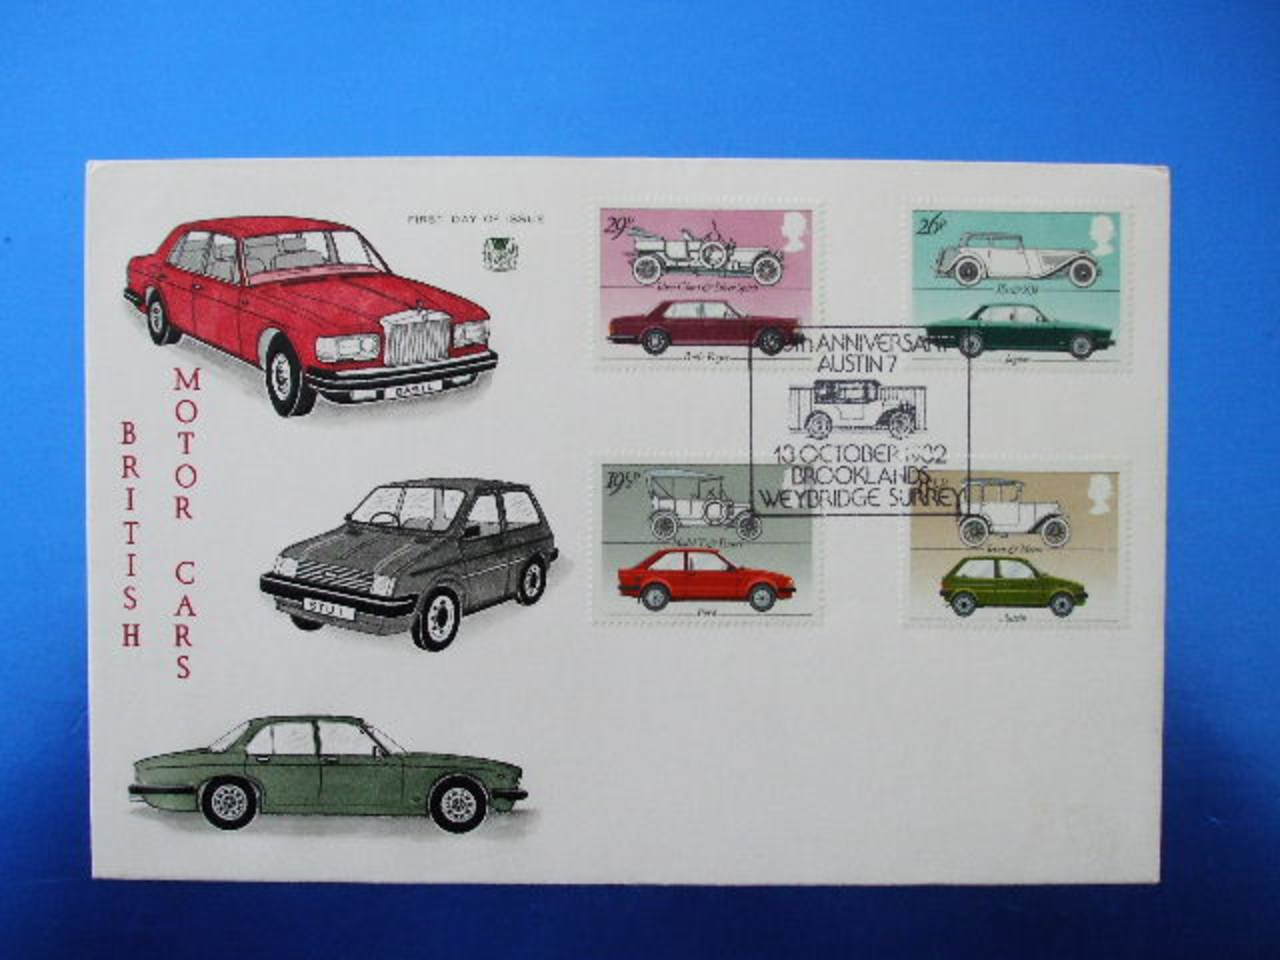 1982 BRITISH MOTOR CARS FIRST DAY COVER - AUSTIN 7 BROOKLANDS SHS